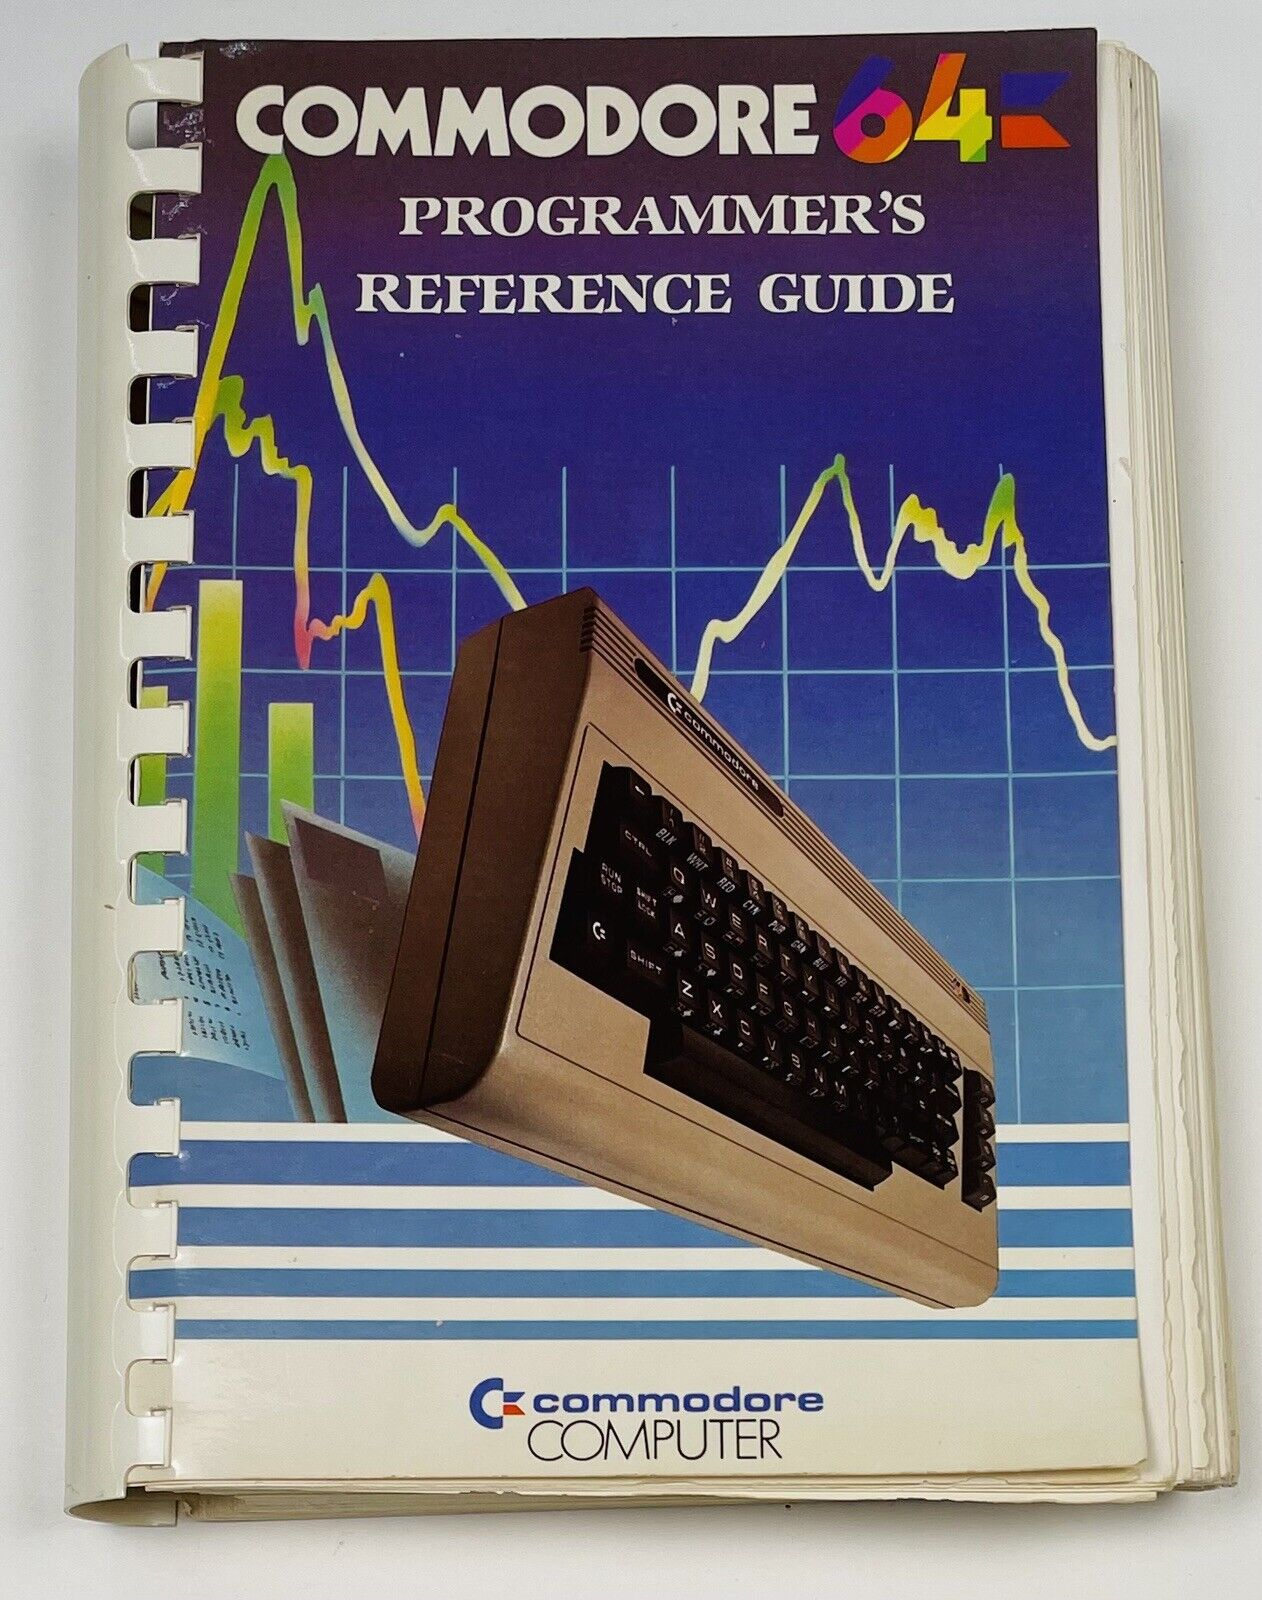 Commodore 64 Programmer's Reference Guide (1983, First Edition, 8th Printing)